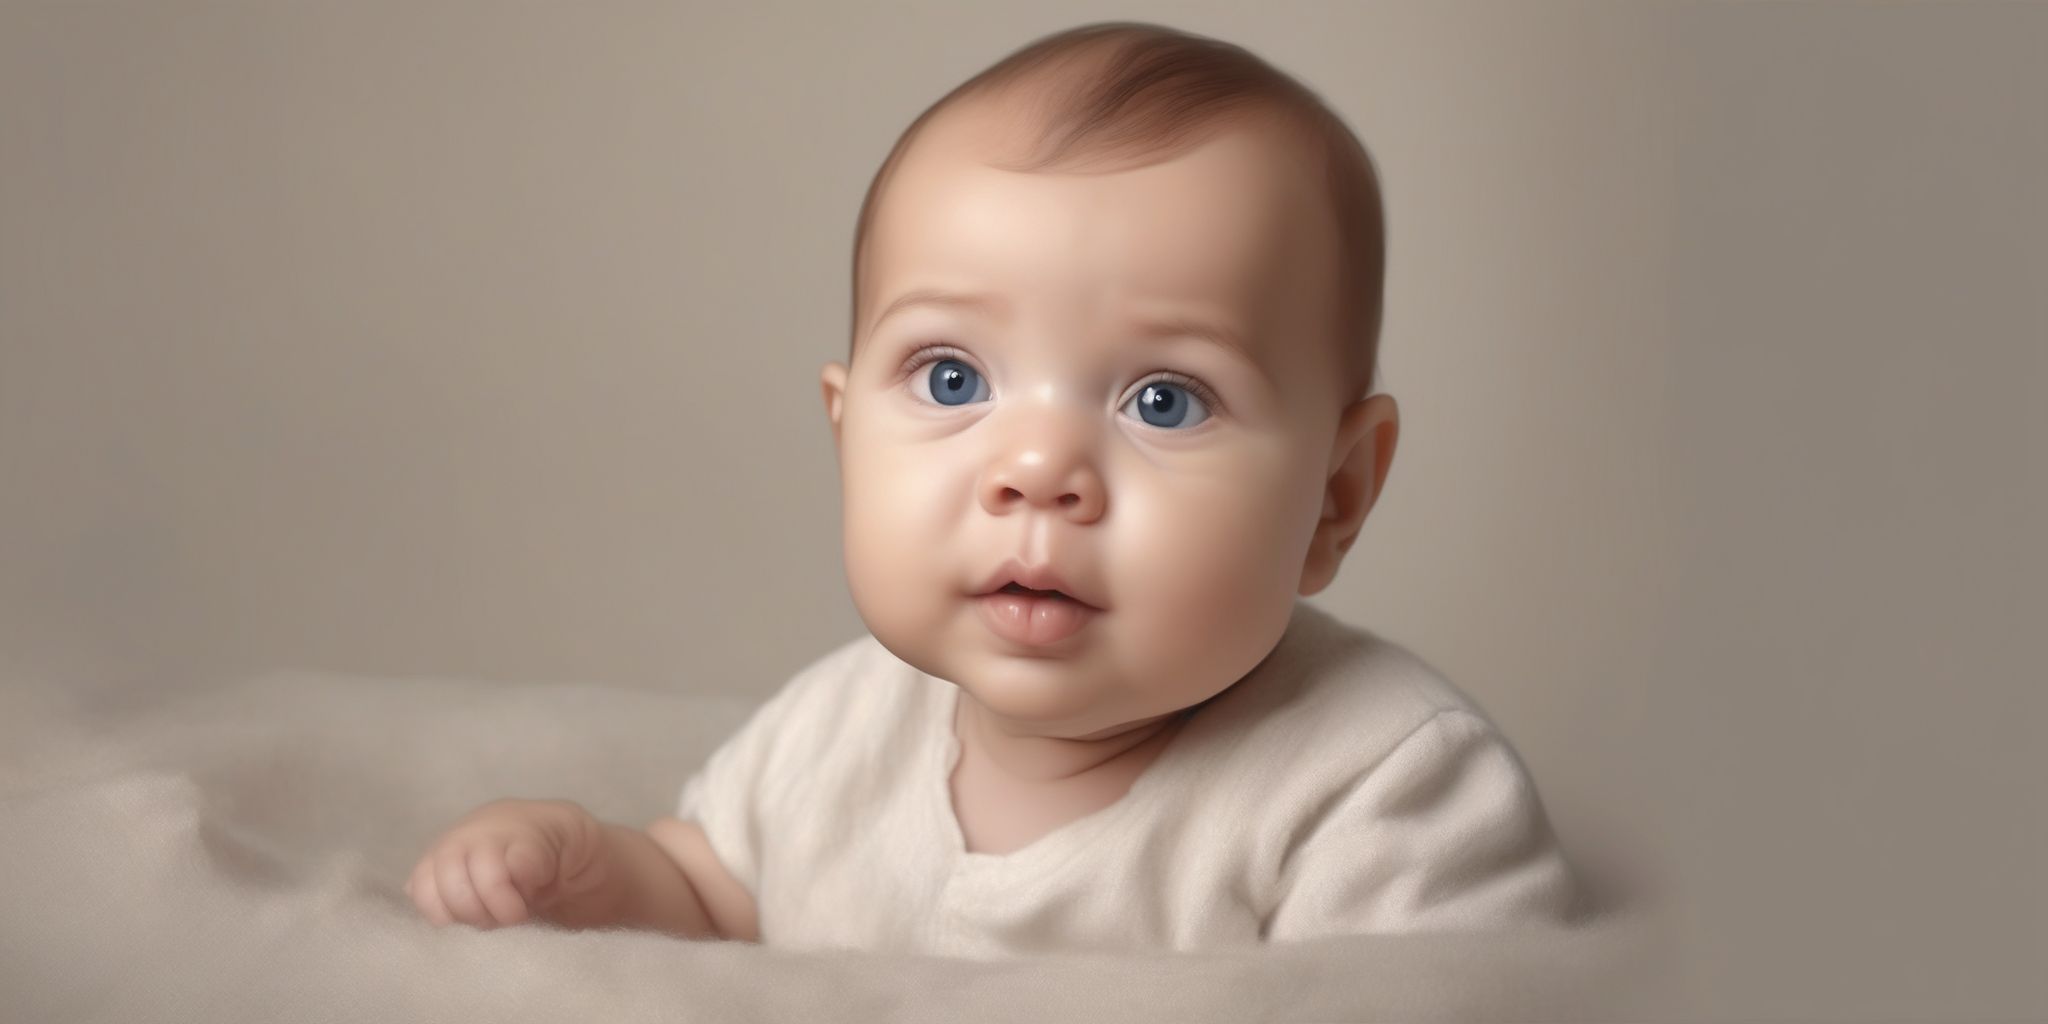 Baby  in realistic, photographic style